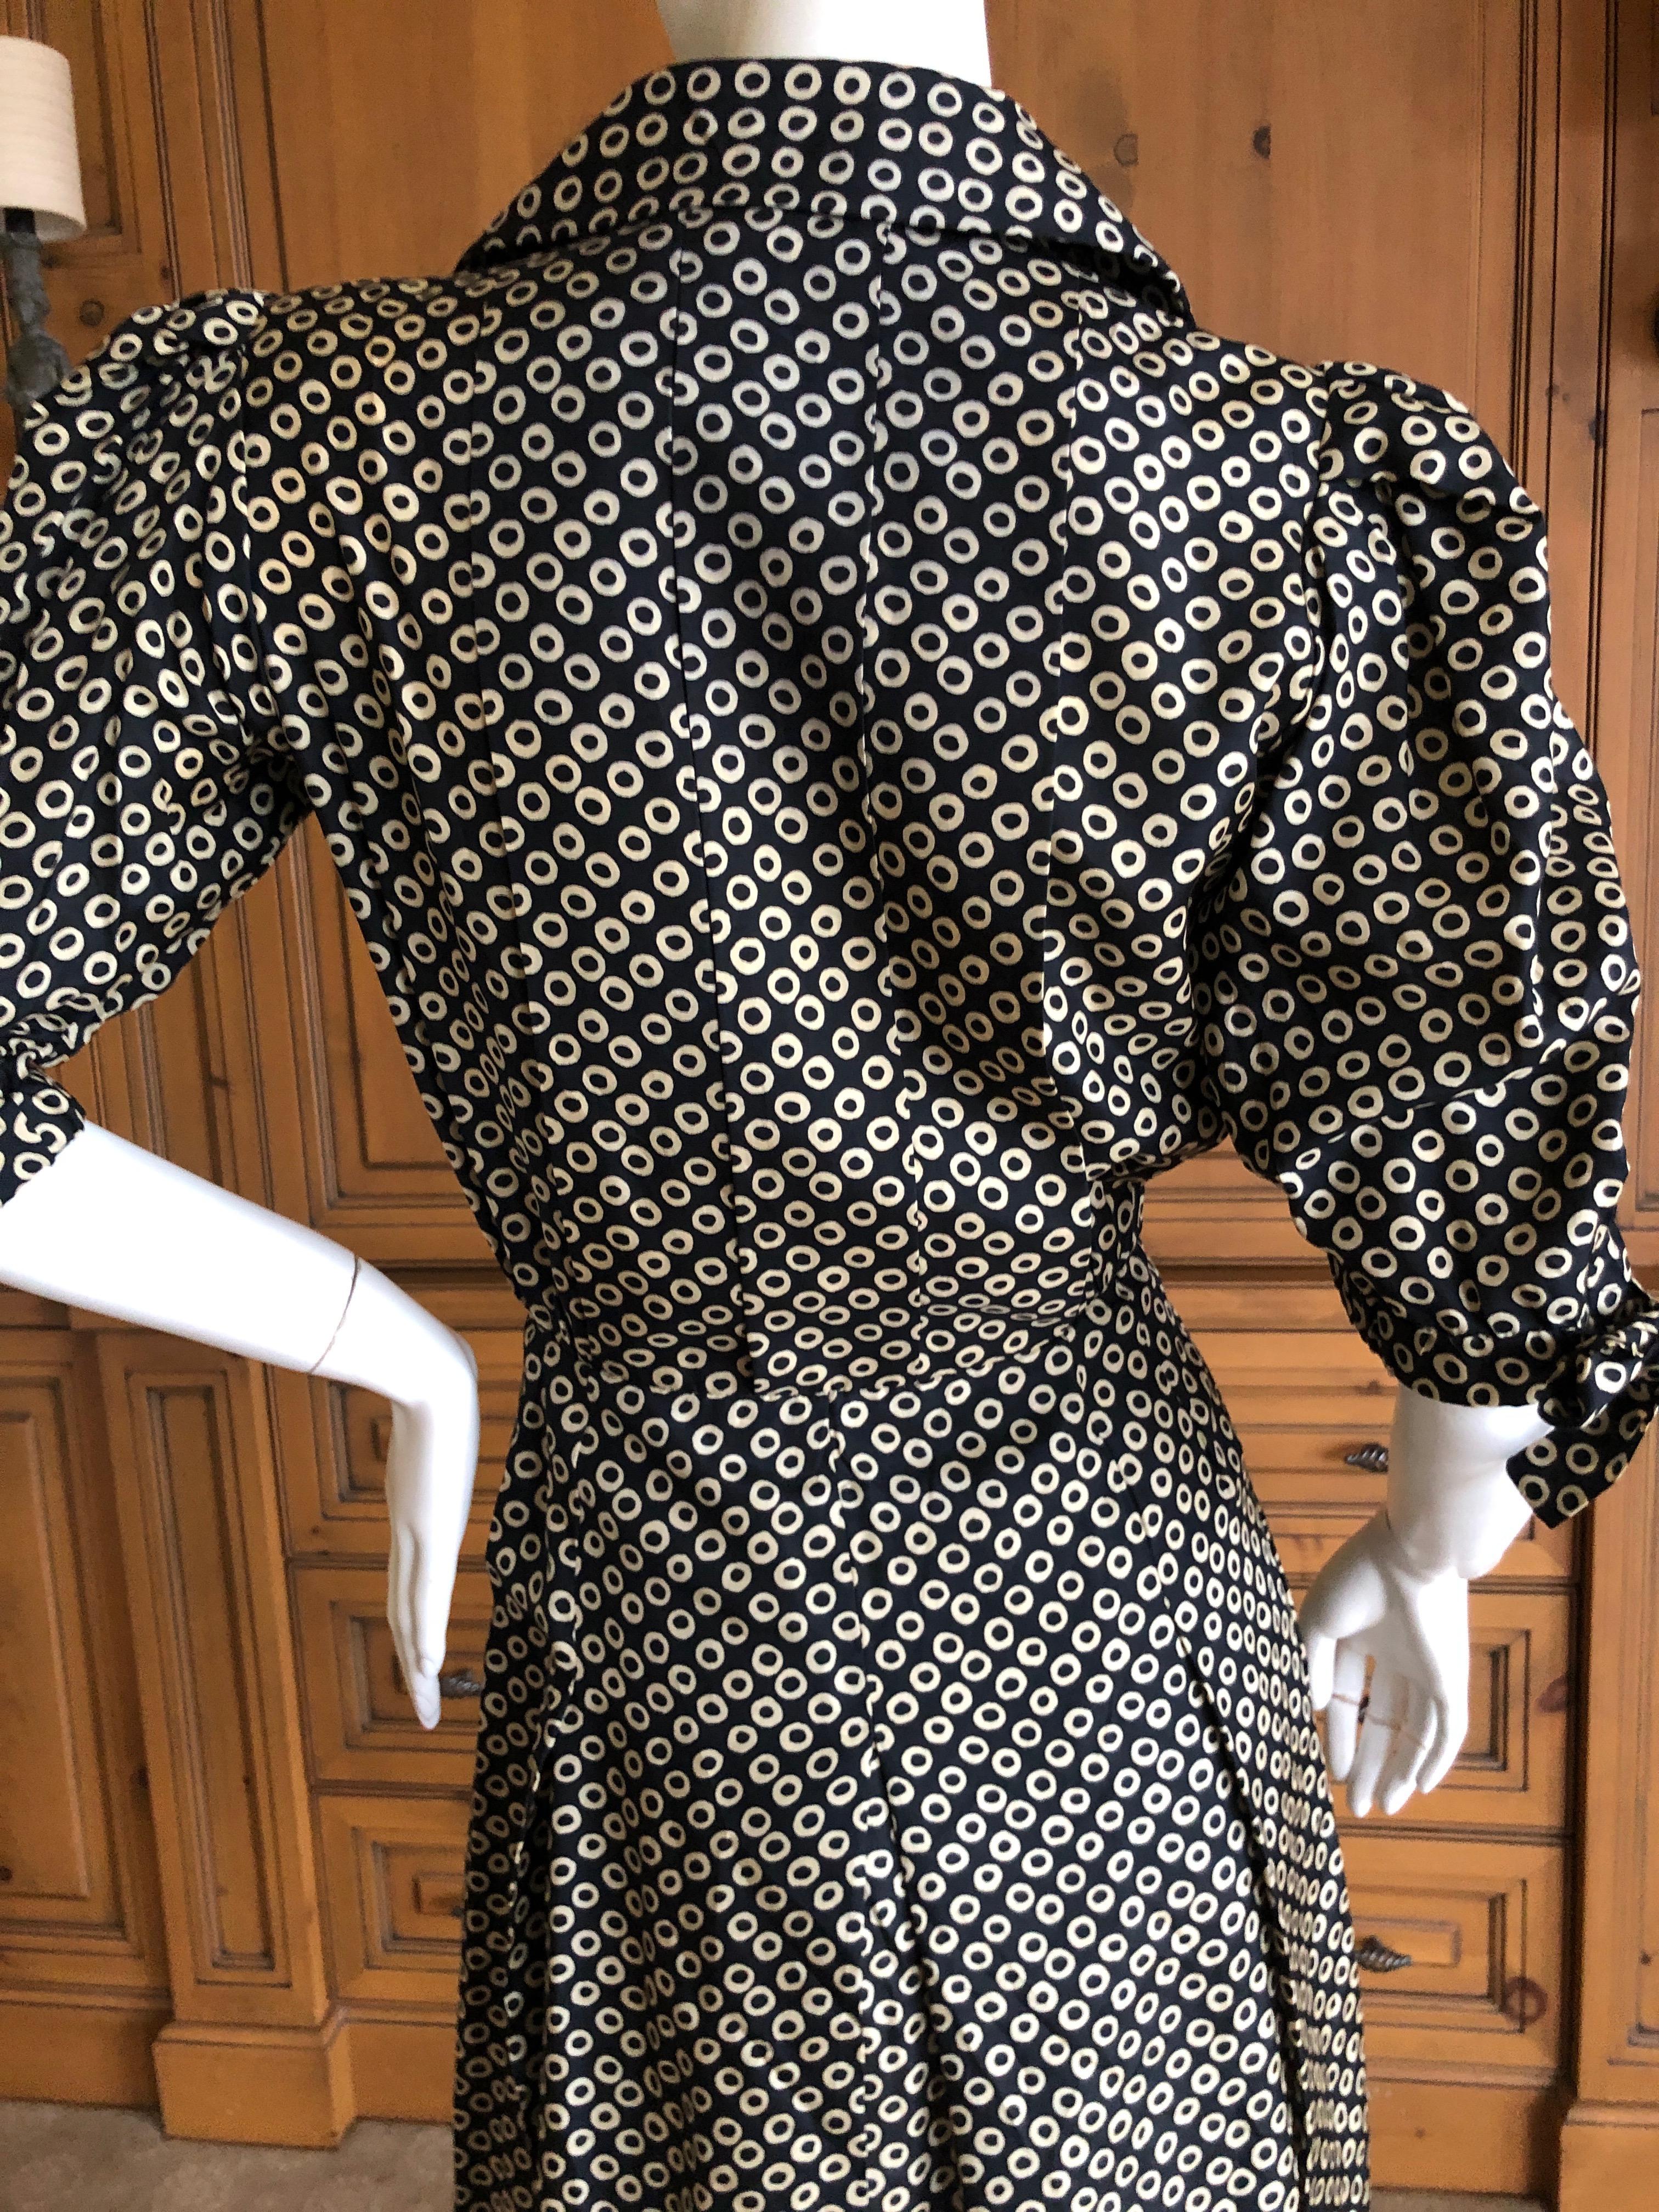 Yves Saint Laurent Rive Gauche Vintage 70's Silk Polka Dot Day Dress In Excellent Condition For Sale In Cloverdale, CA